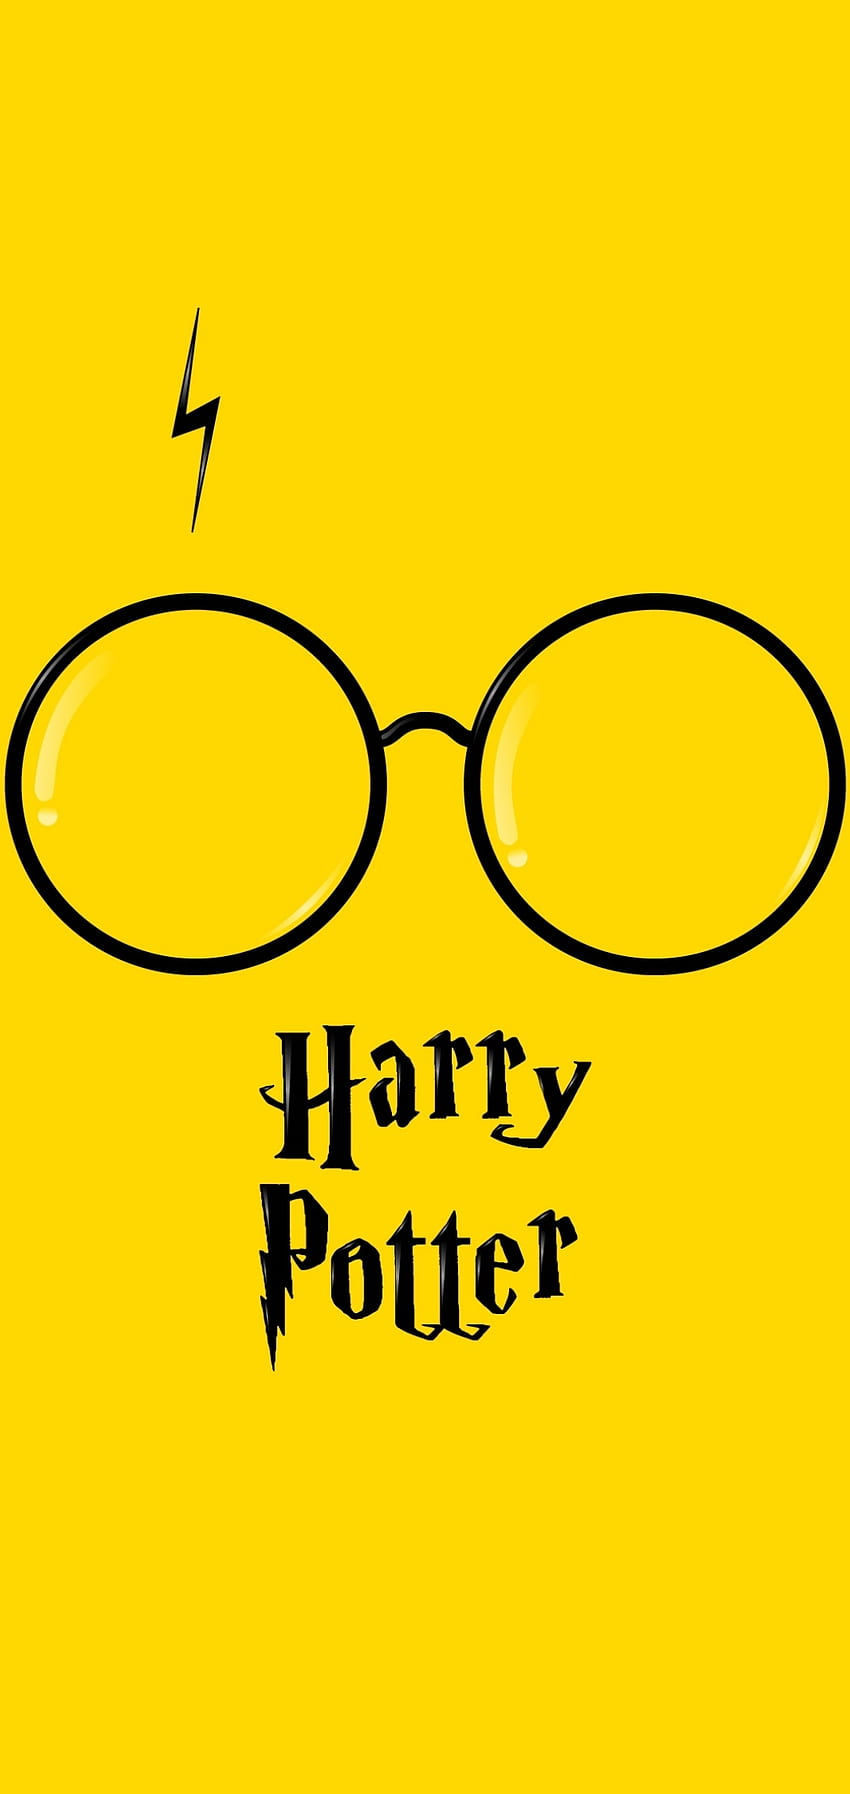 Harry Potter iPhone : Background For iPhone, Harry Potter Friends HD phone wallpaper